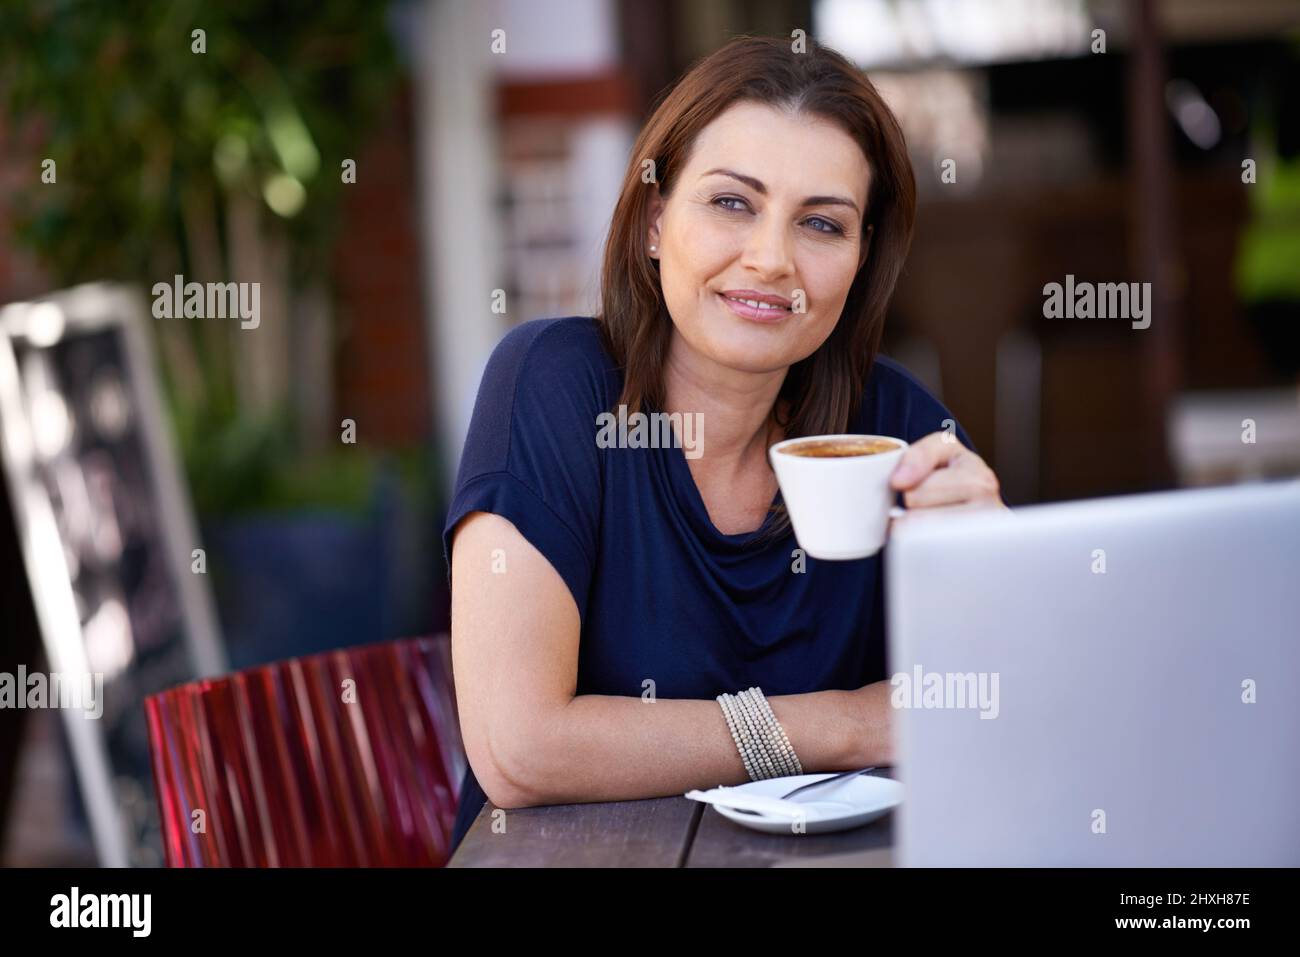 Blogging at the coffee shop. Shot of an attractive woman using her laptop at a coffee shop. Stock Photo